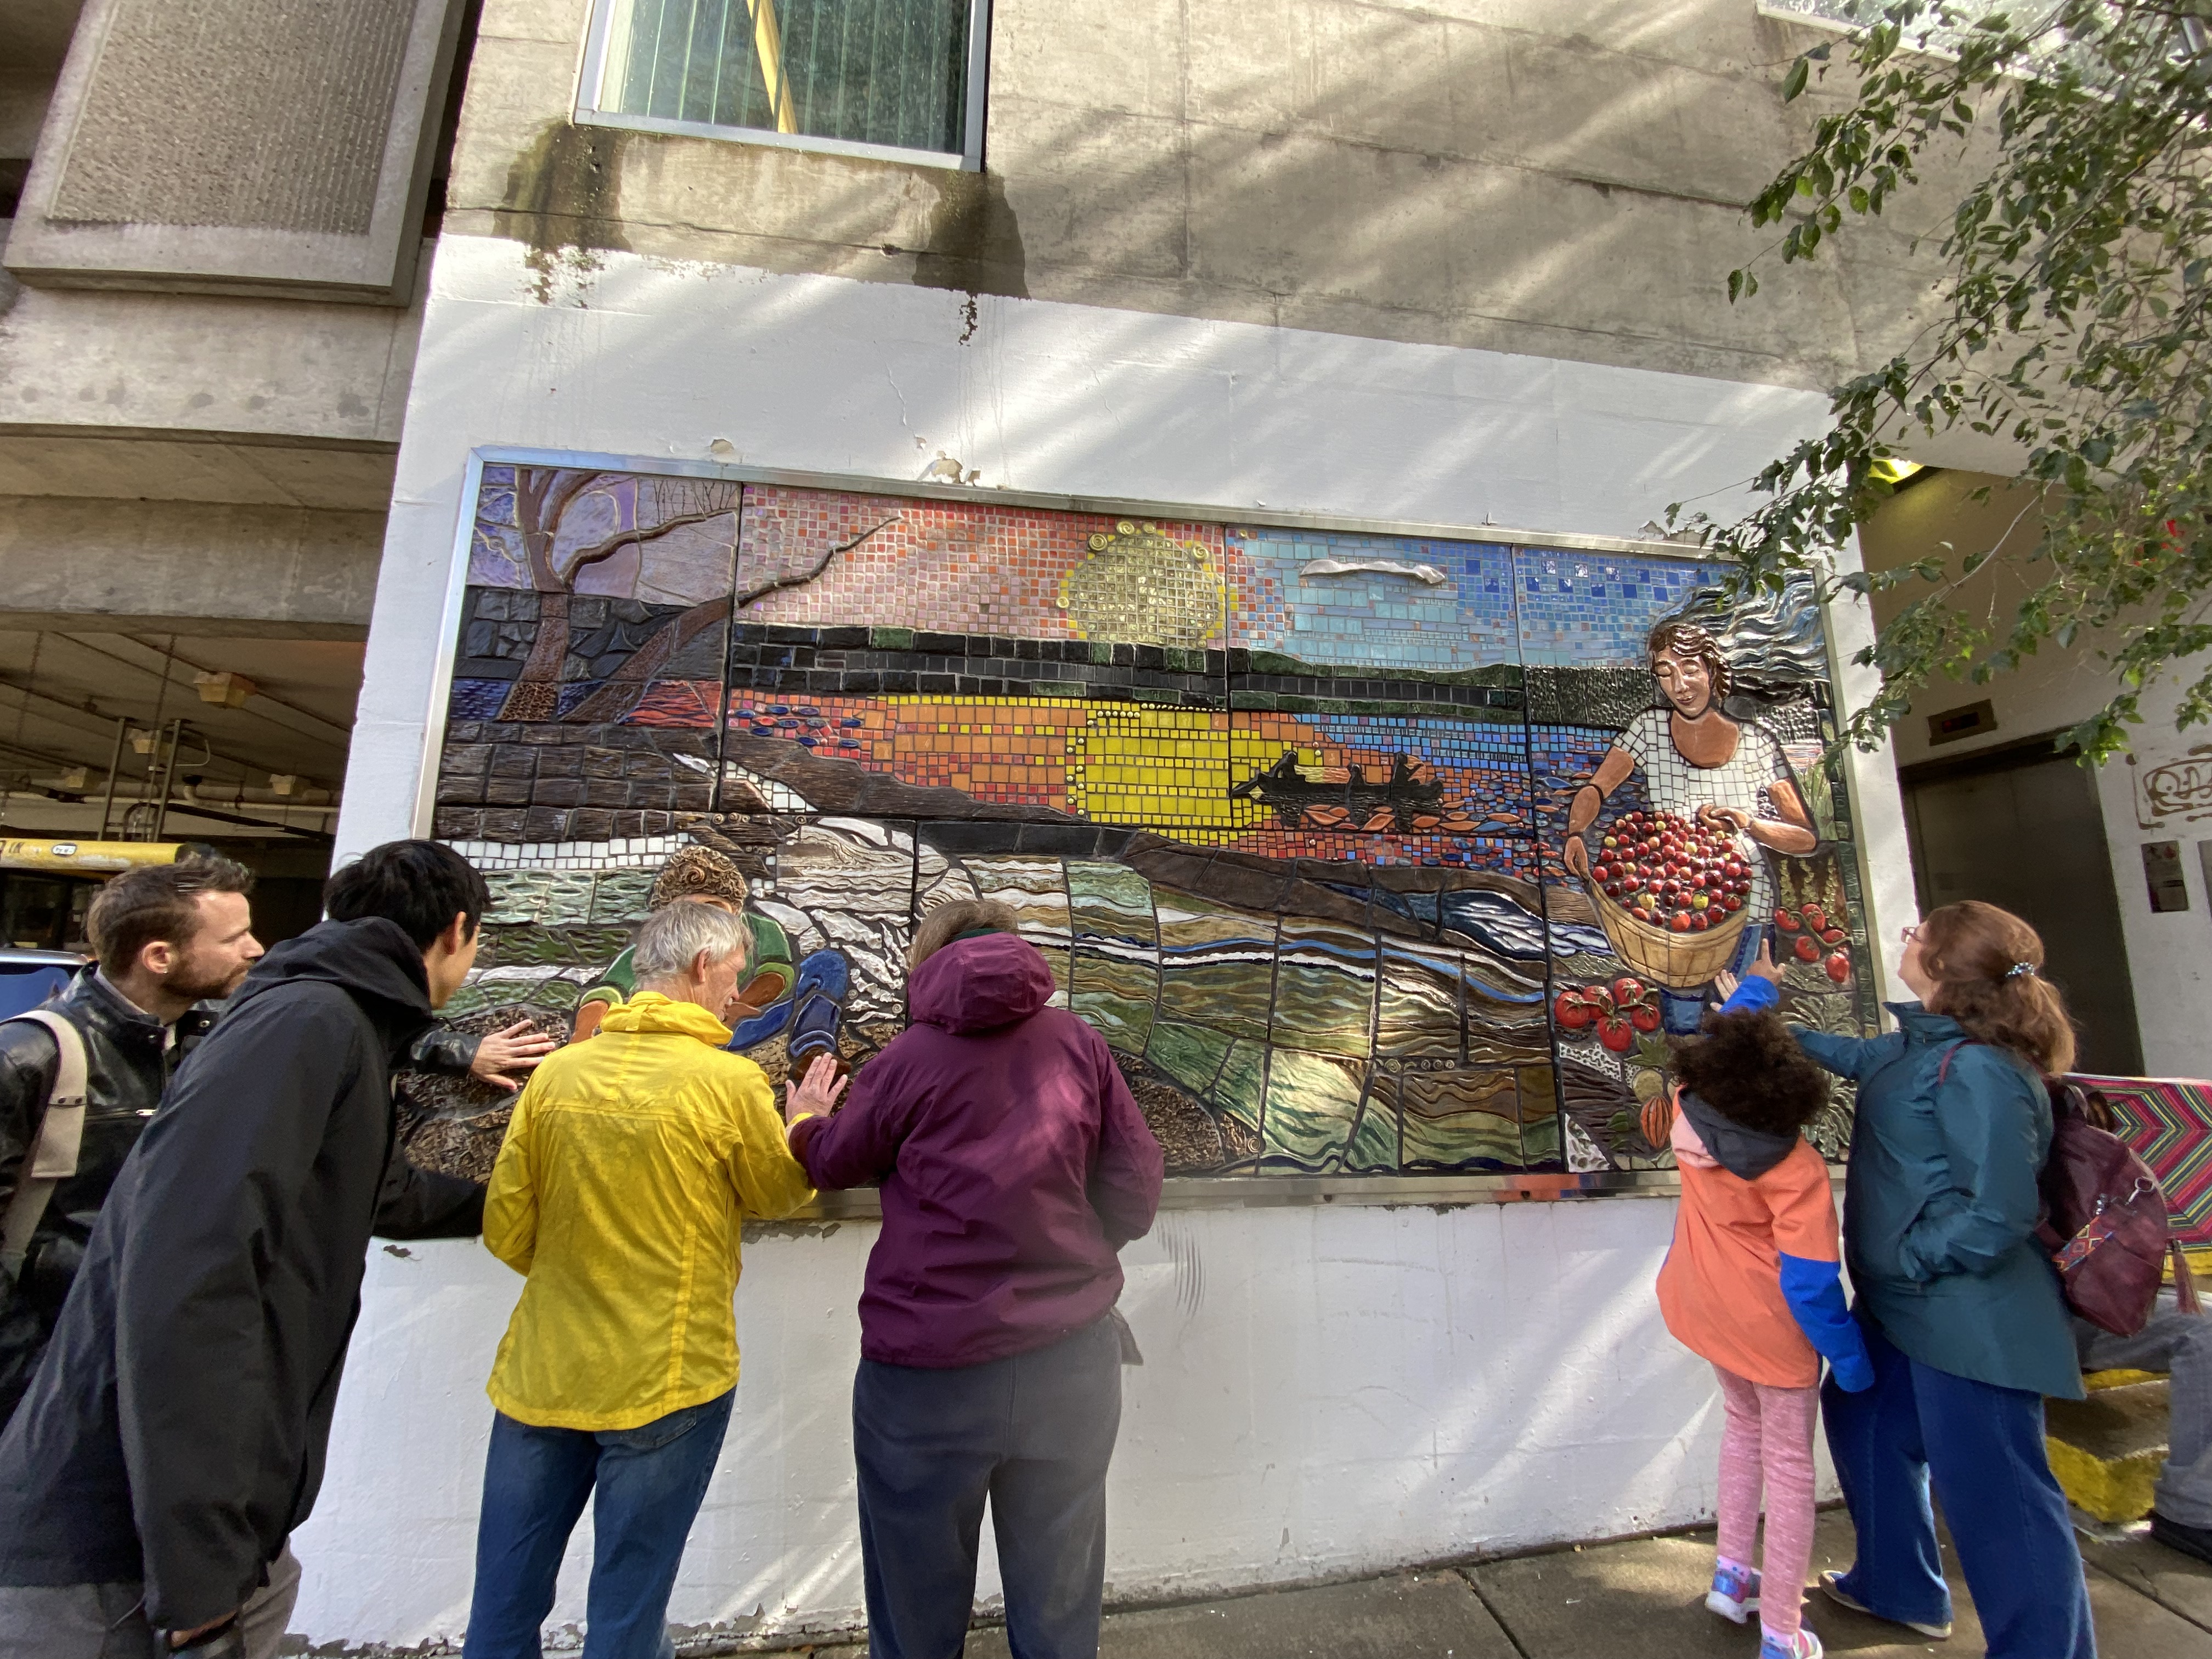 Six mural tour attendees wearing colorful rain jackets reach out to feel the textured tiles near the bottom of a large mosaic. Their backs are to the camera. The mosaic is called 'Feels Like Home - Spirit of Ithaca' and was created by Annemarie Zwack. The mosiac shows a sunset scene with a child planting seeds on the left, a woman carrying a bushel of tomatoes on the right, and three canoers in the background. The tiles on the mosaic are different sizes, shapes, and textures; towards the bottom there are large ceramic tiles with a ripple texture, whereas the sky and water are composed of small, smooth tiles. The tomatoes in the bushel are also three-dimensional.